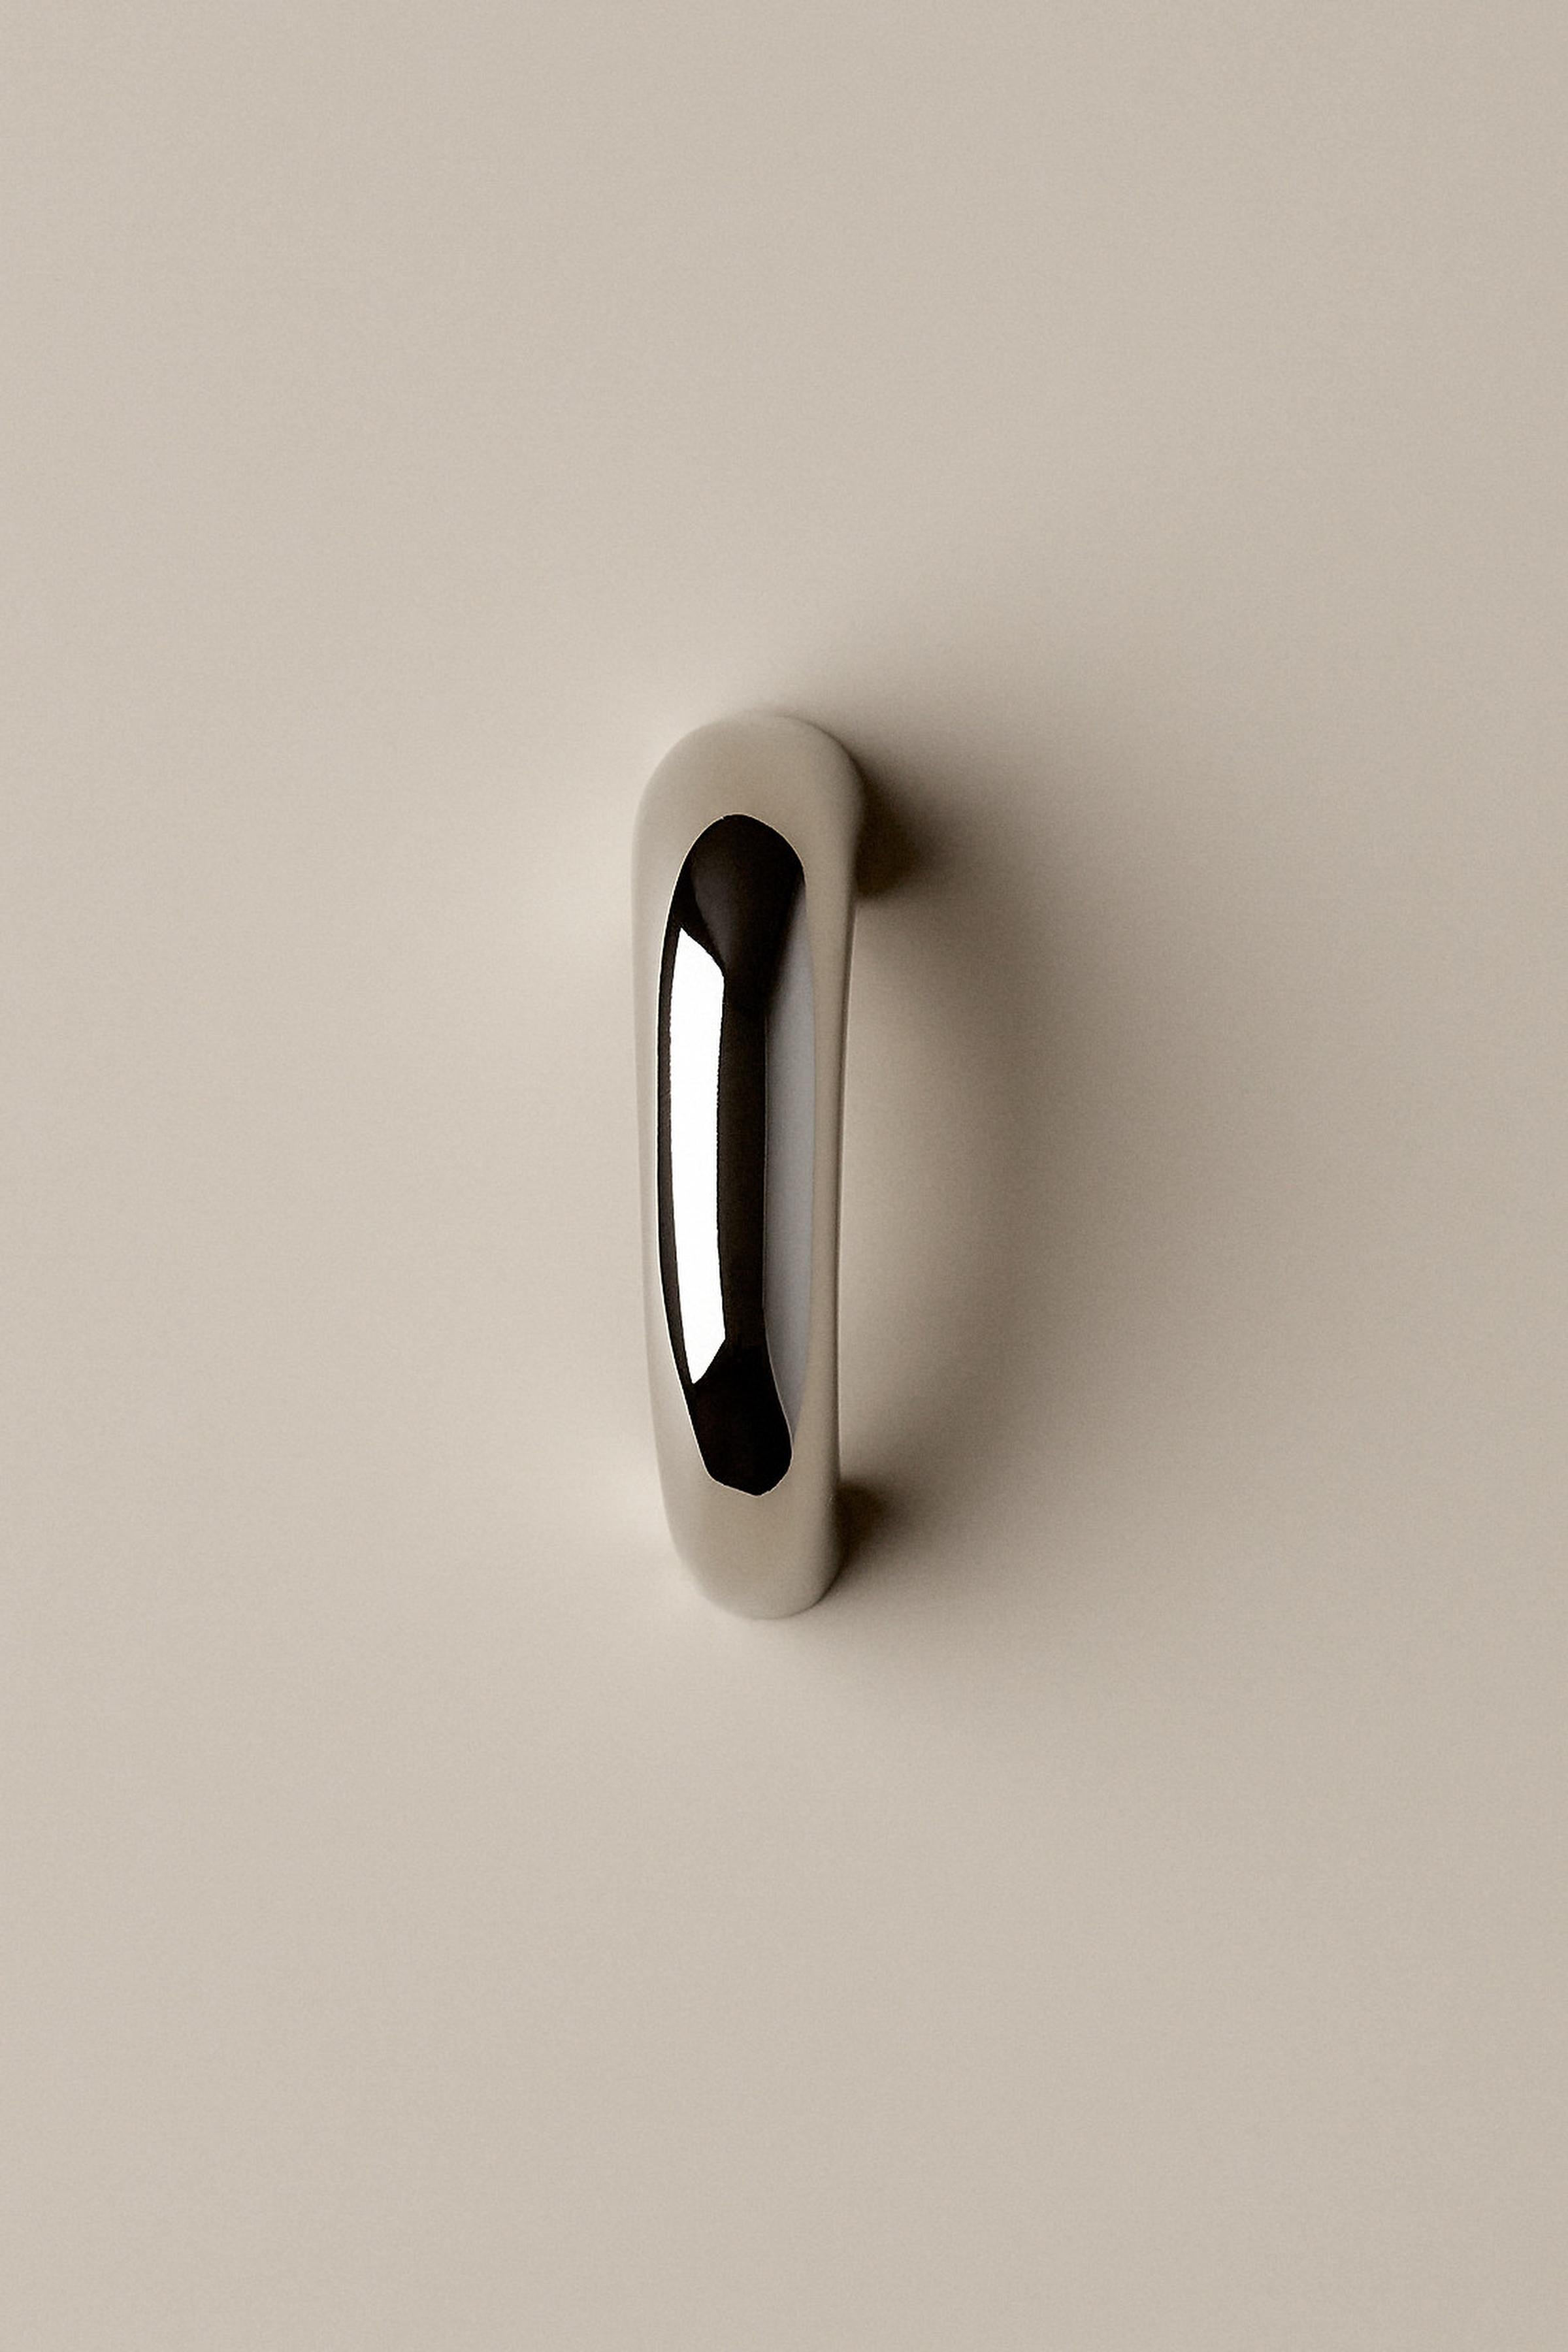 Contemporary Door Handle / Knob 'Burly' by Spaces Within, Polished Nickel For Sale 6